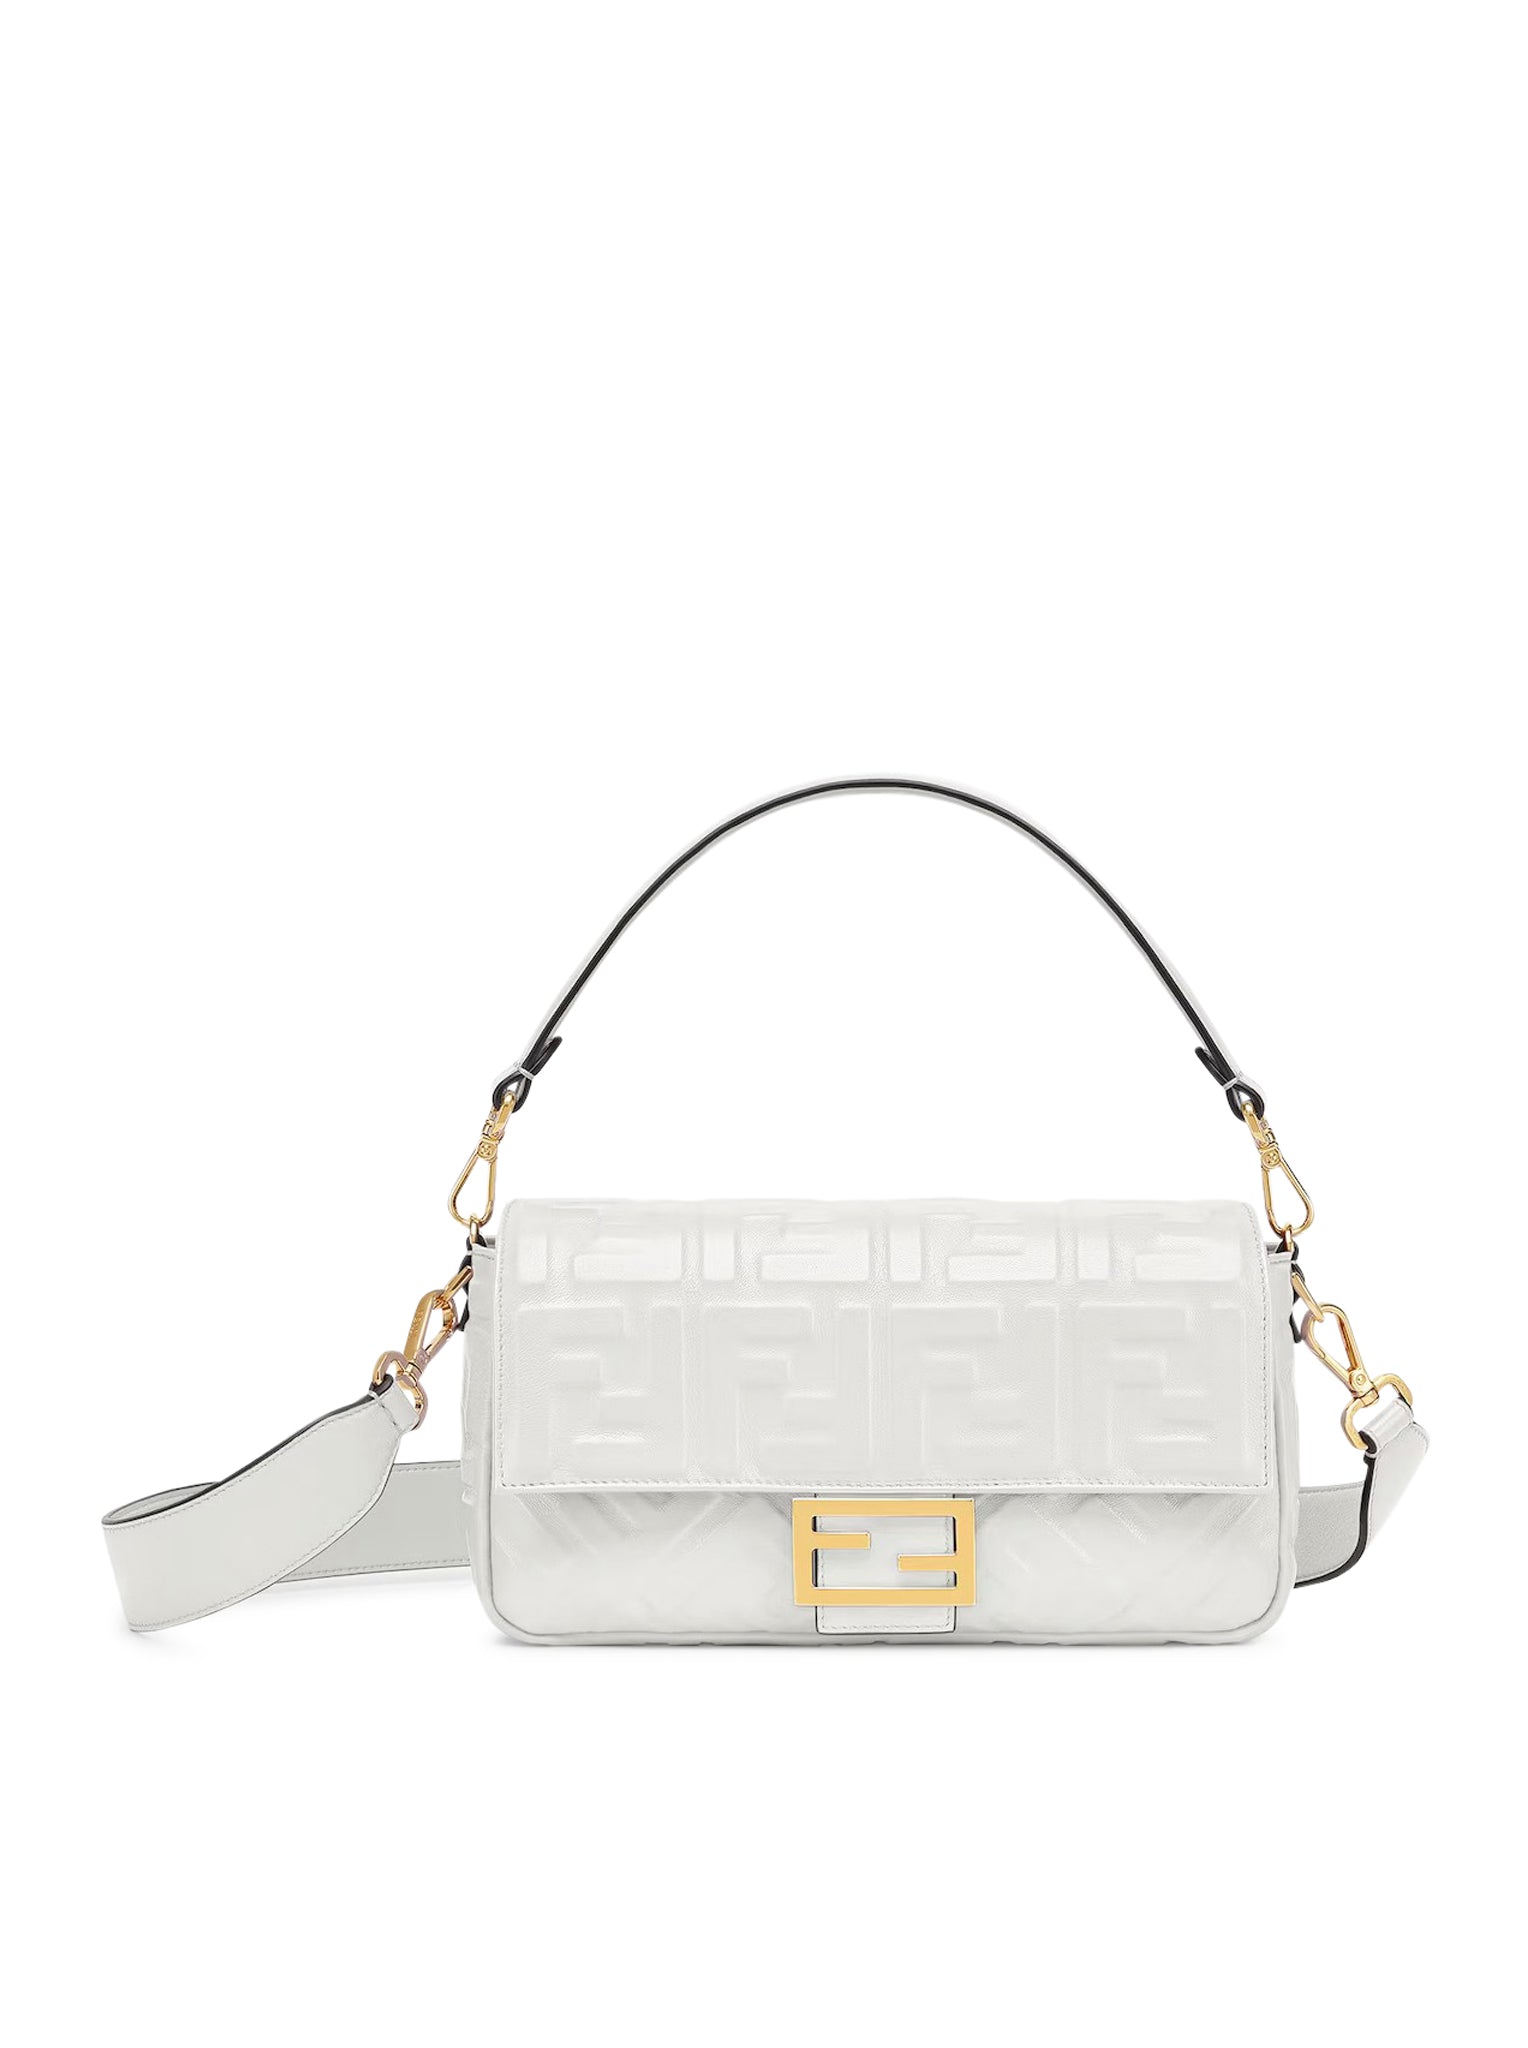 White leather BAGUETTE bag